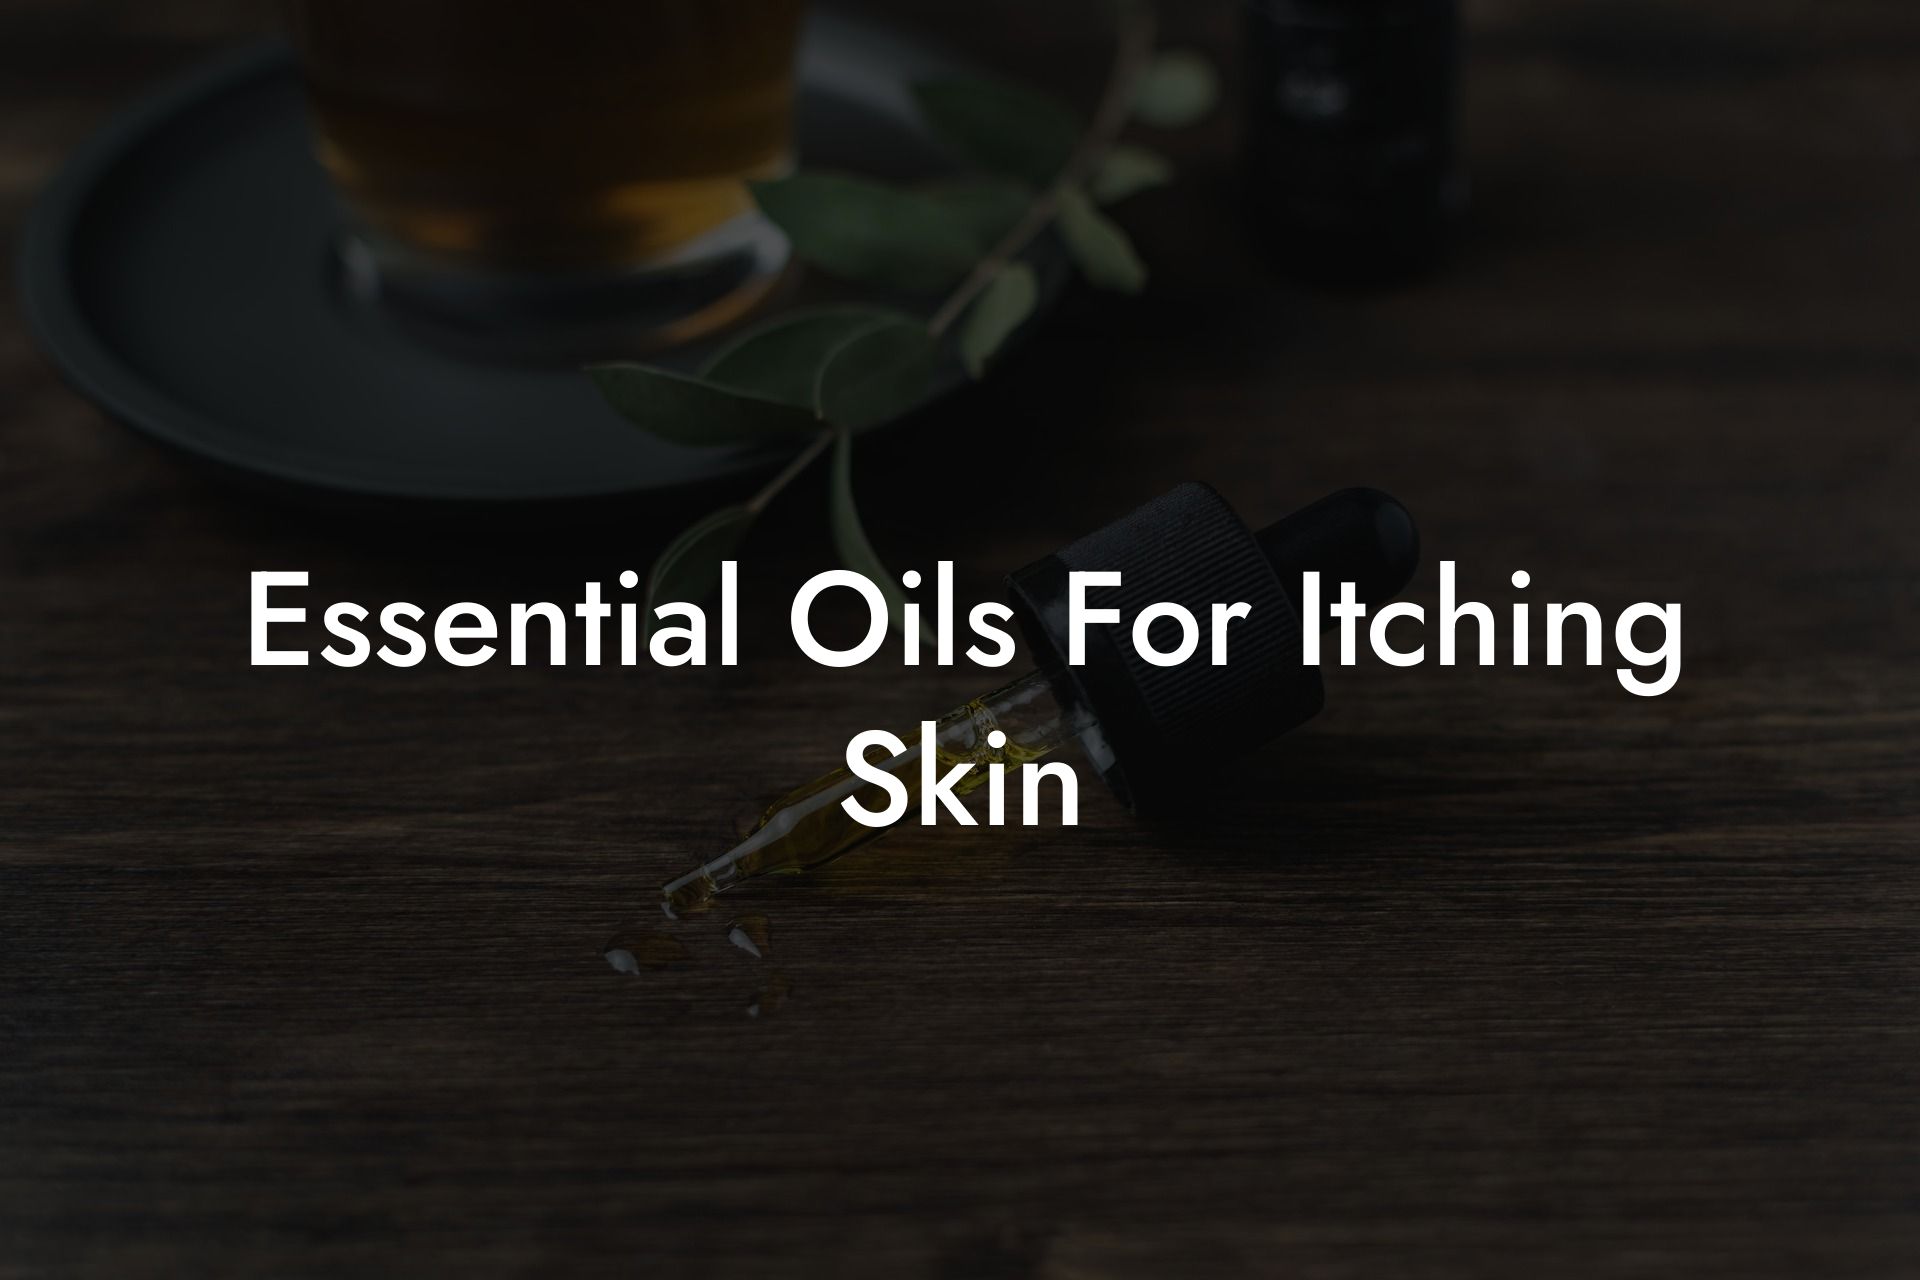 Essential Oils For Itching Skin